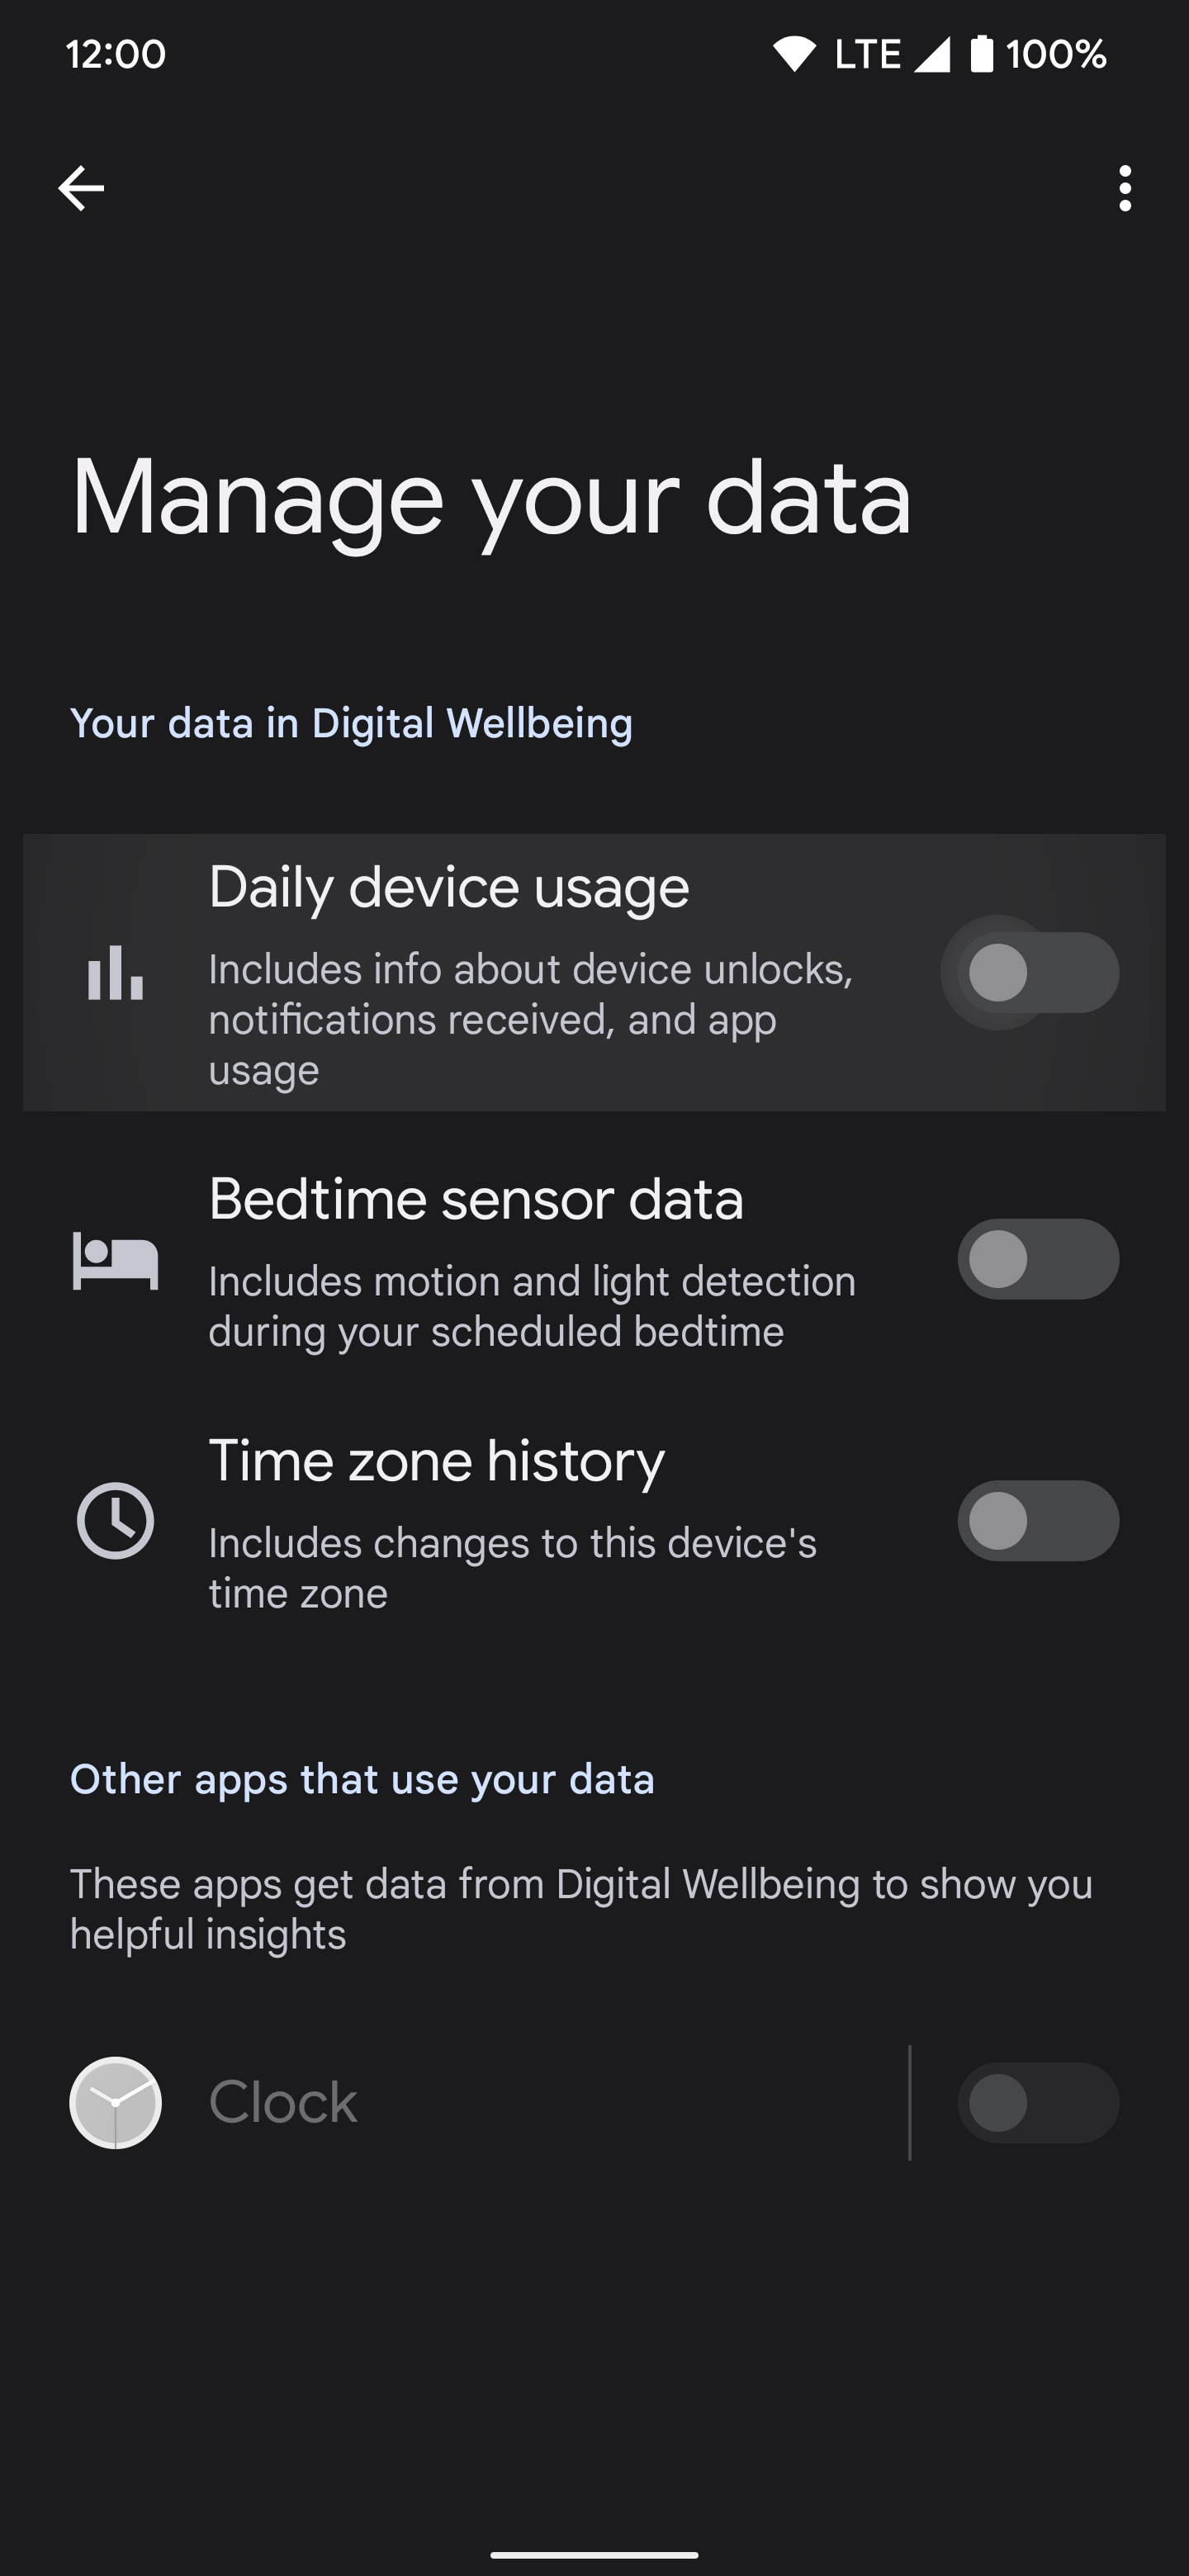 Screenshot shows 'Manage your data' page in Digital Wellbeing settings. Toggle options are shown for Daily device usage, Bedtime sensor data, and Time zone history.